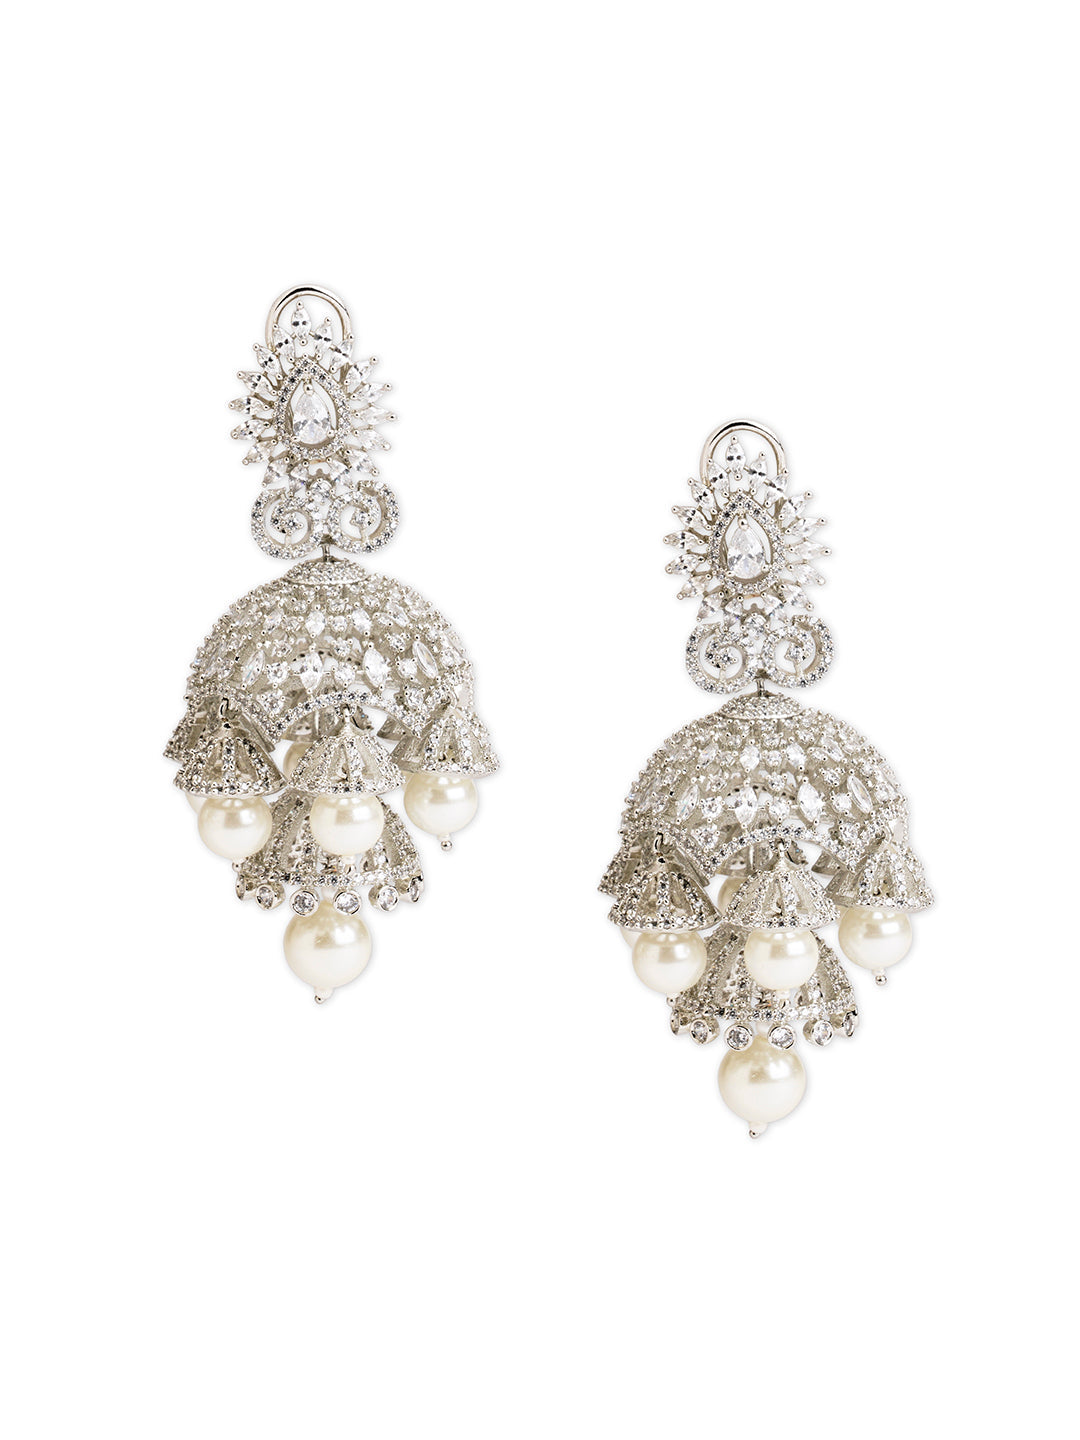 Different Types of Earrings and Earring Styles